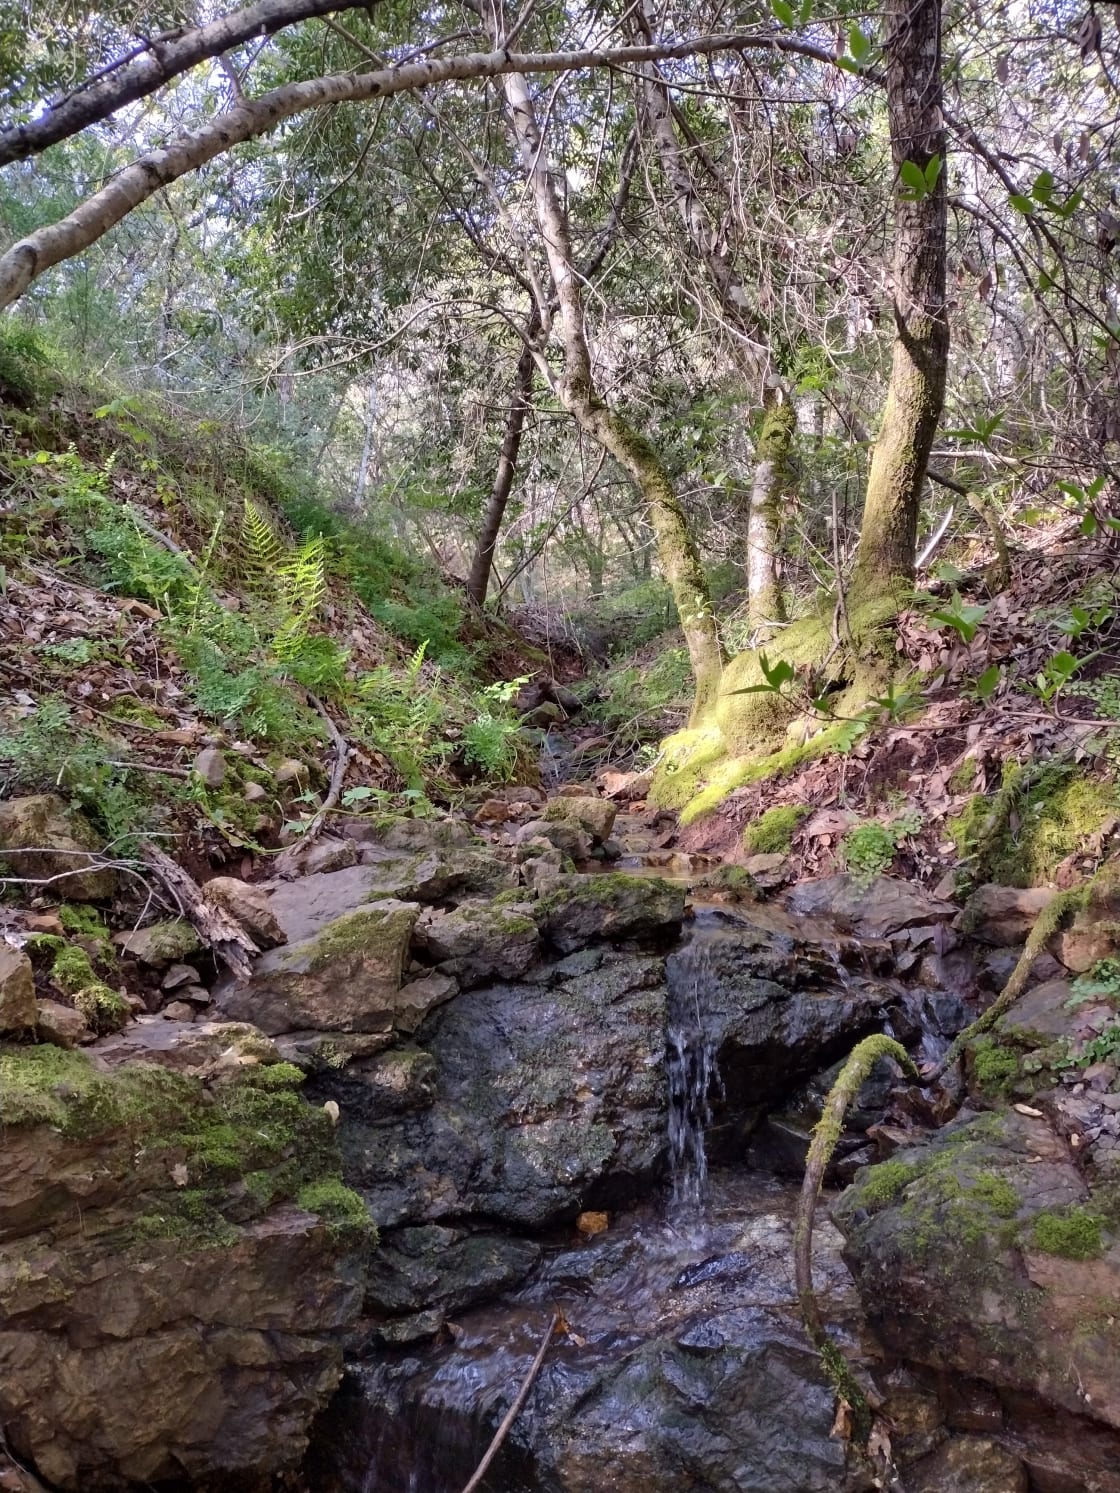 One of 3 seasonal creeks that run through the forest. 